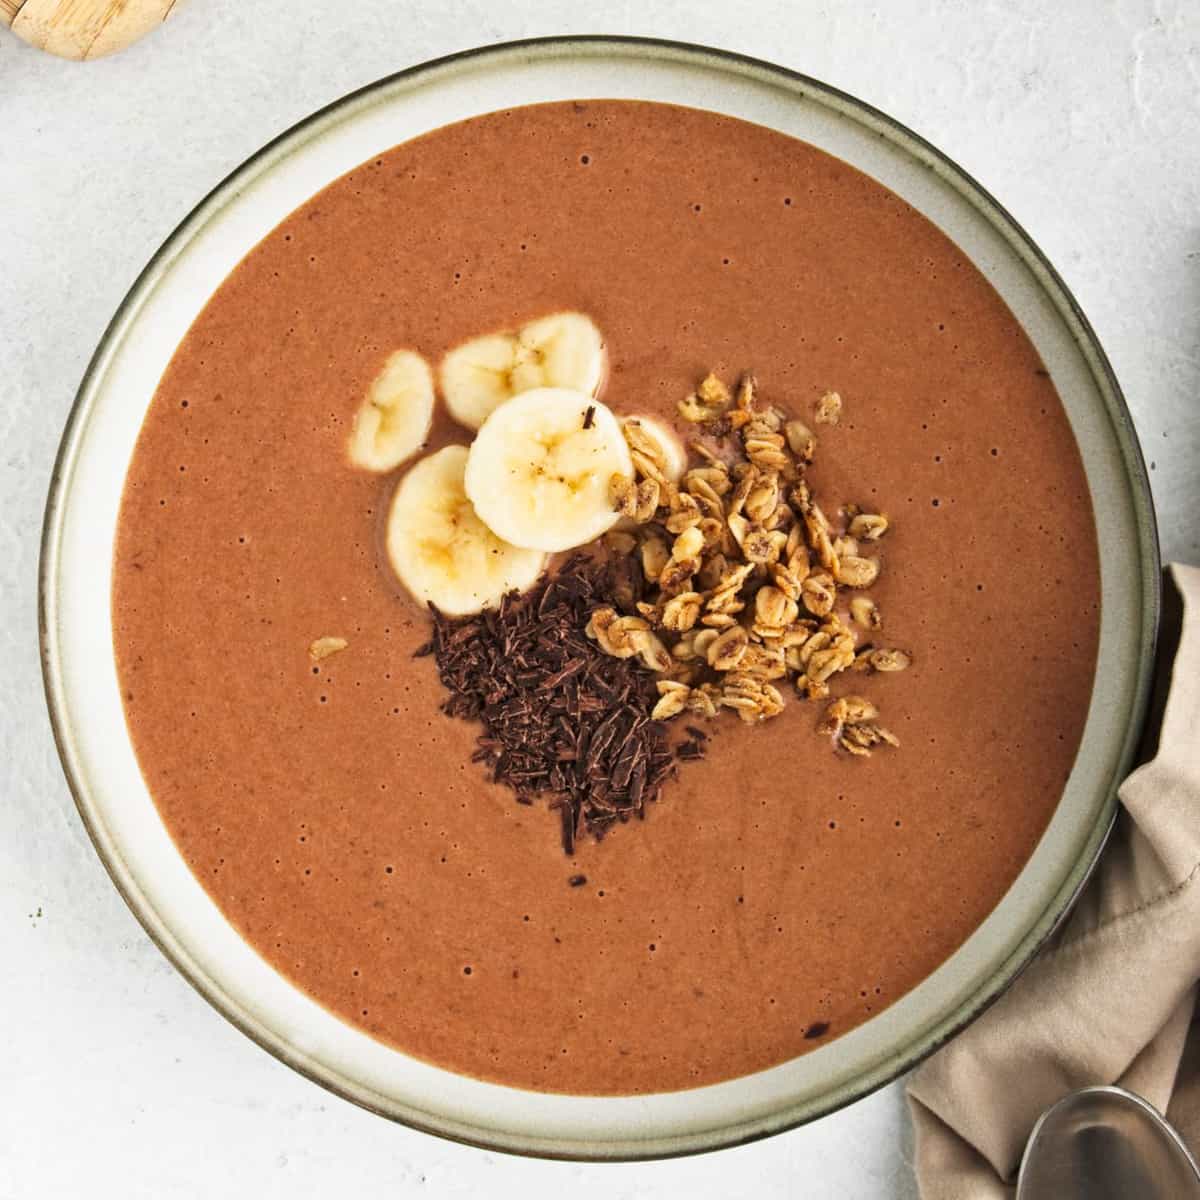 Chocolate smoothie in a bowl topped with banana, grated chocolate and granola.